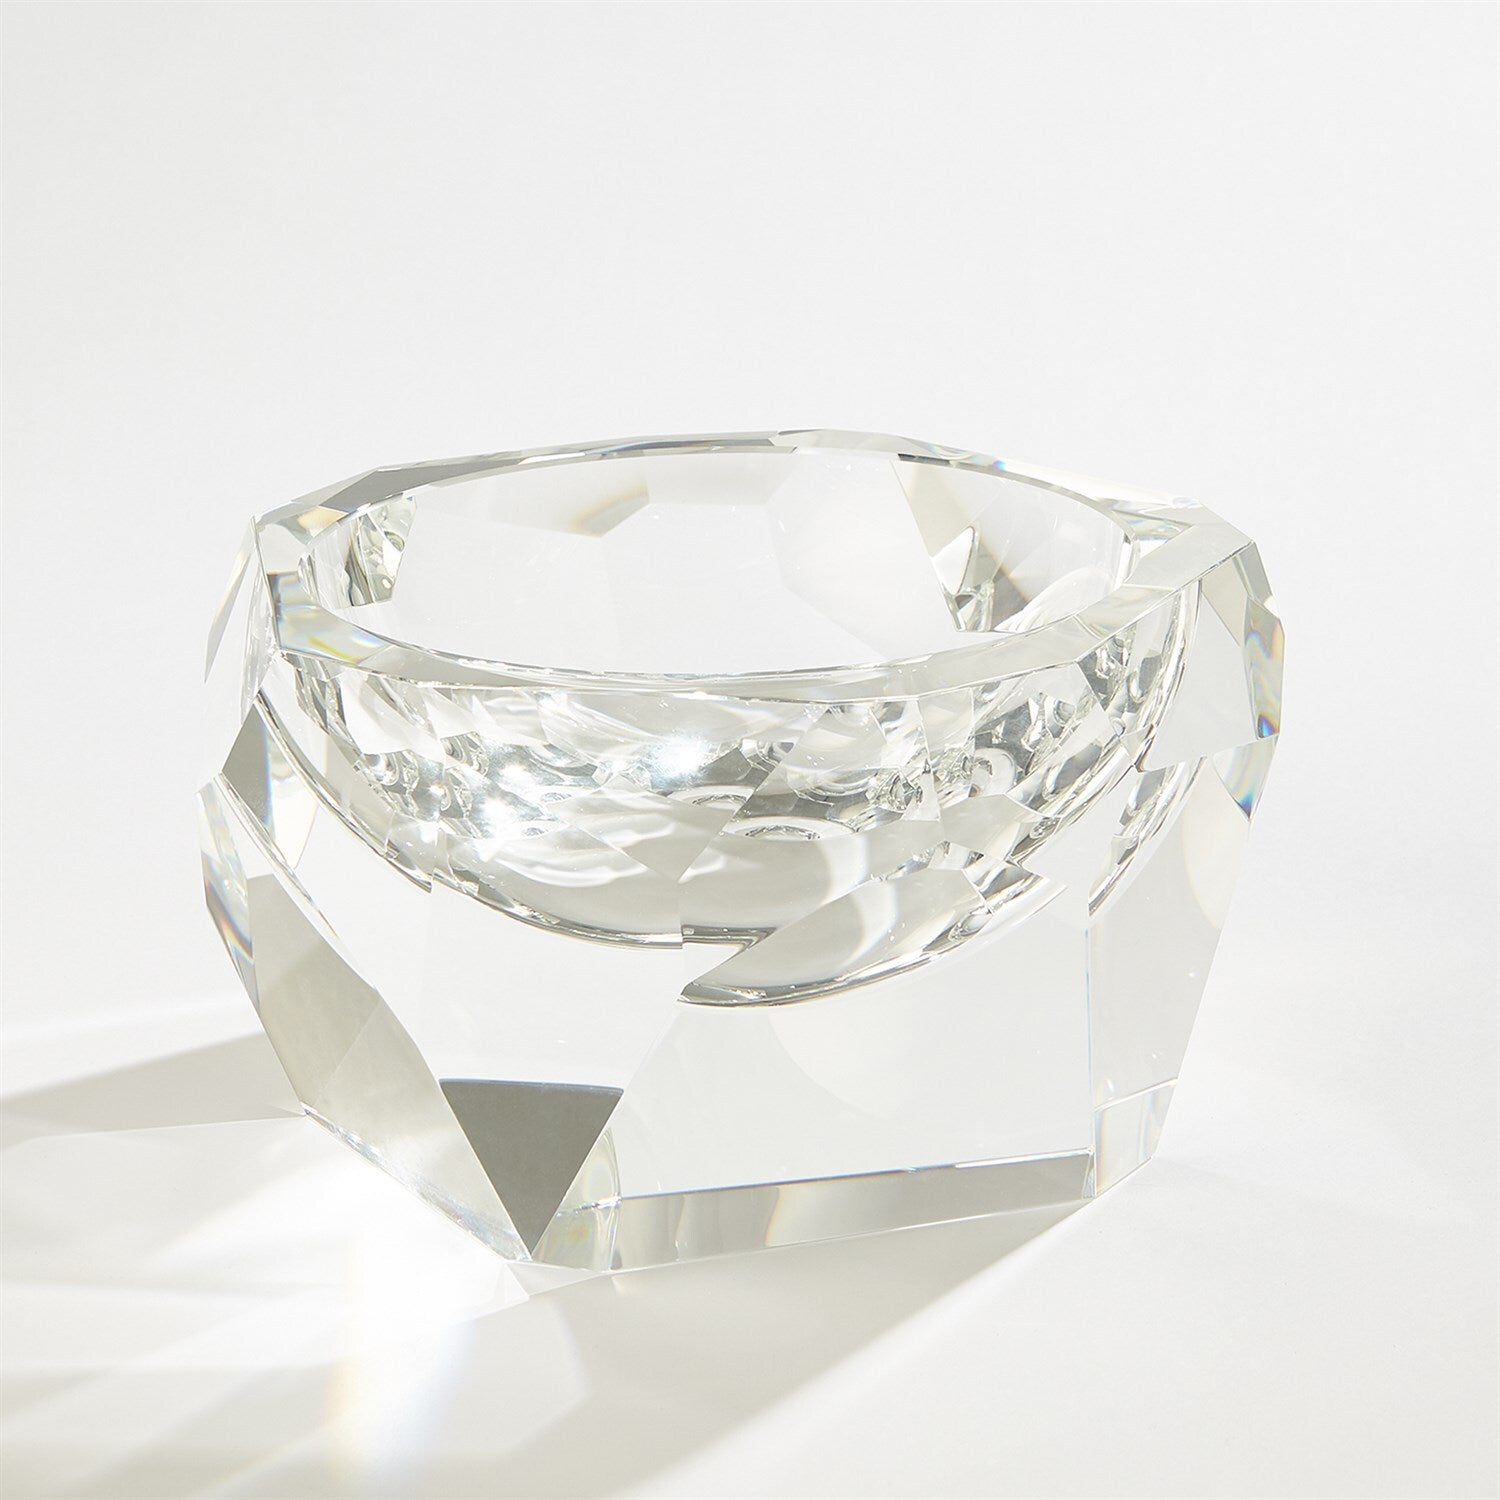 Multi Facet Crystal Bowl-Clear-Lg